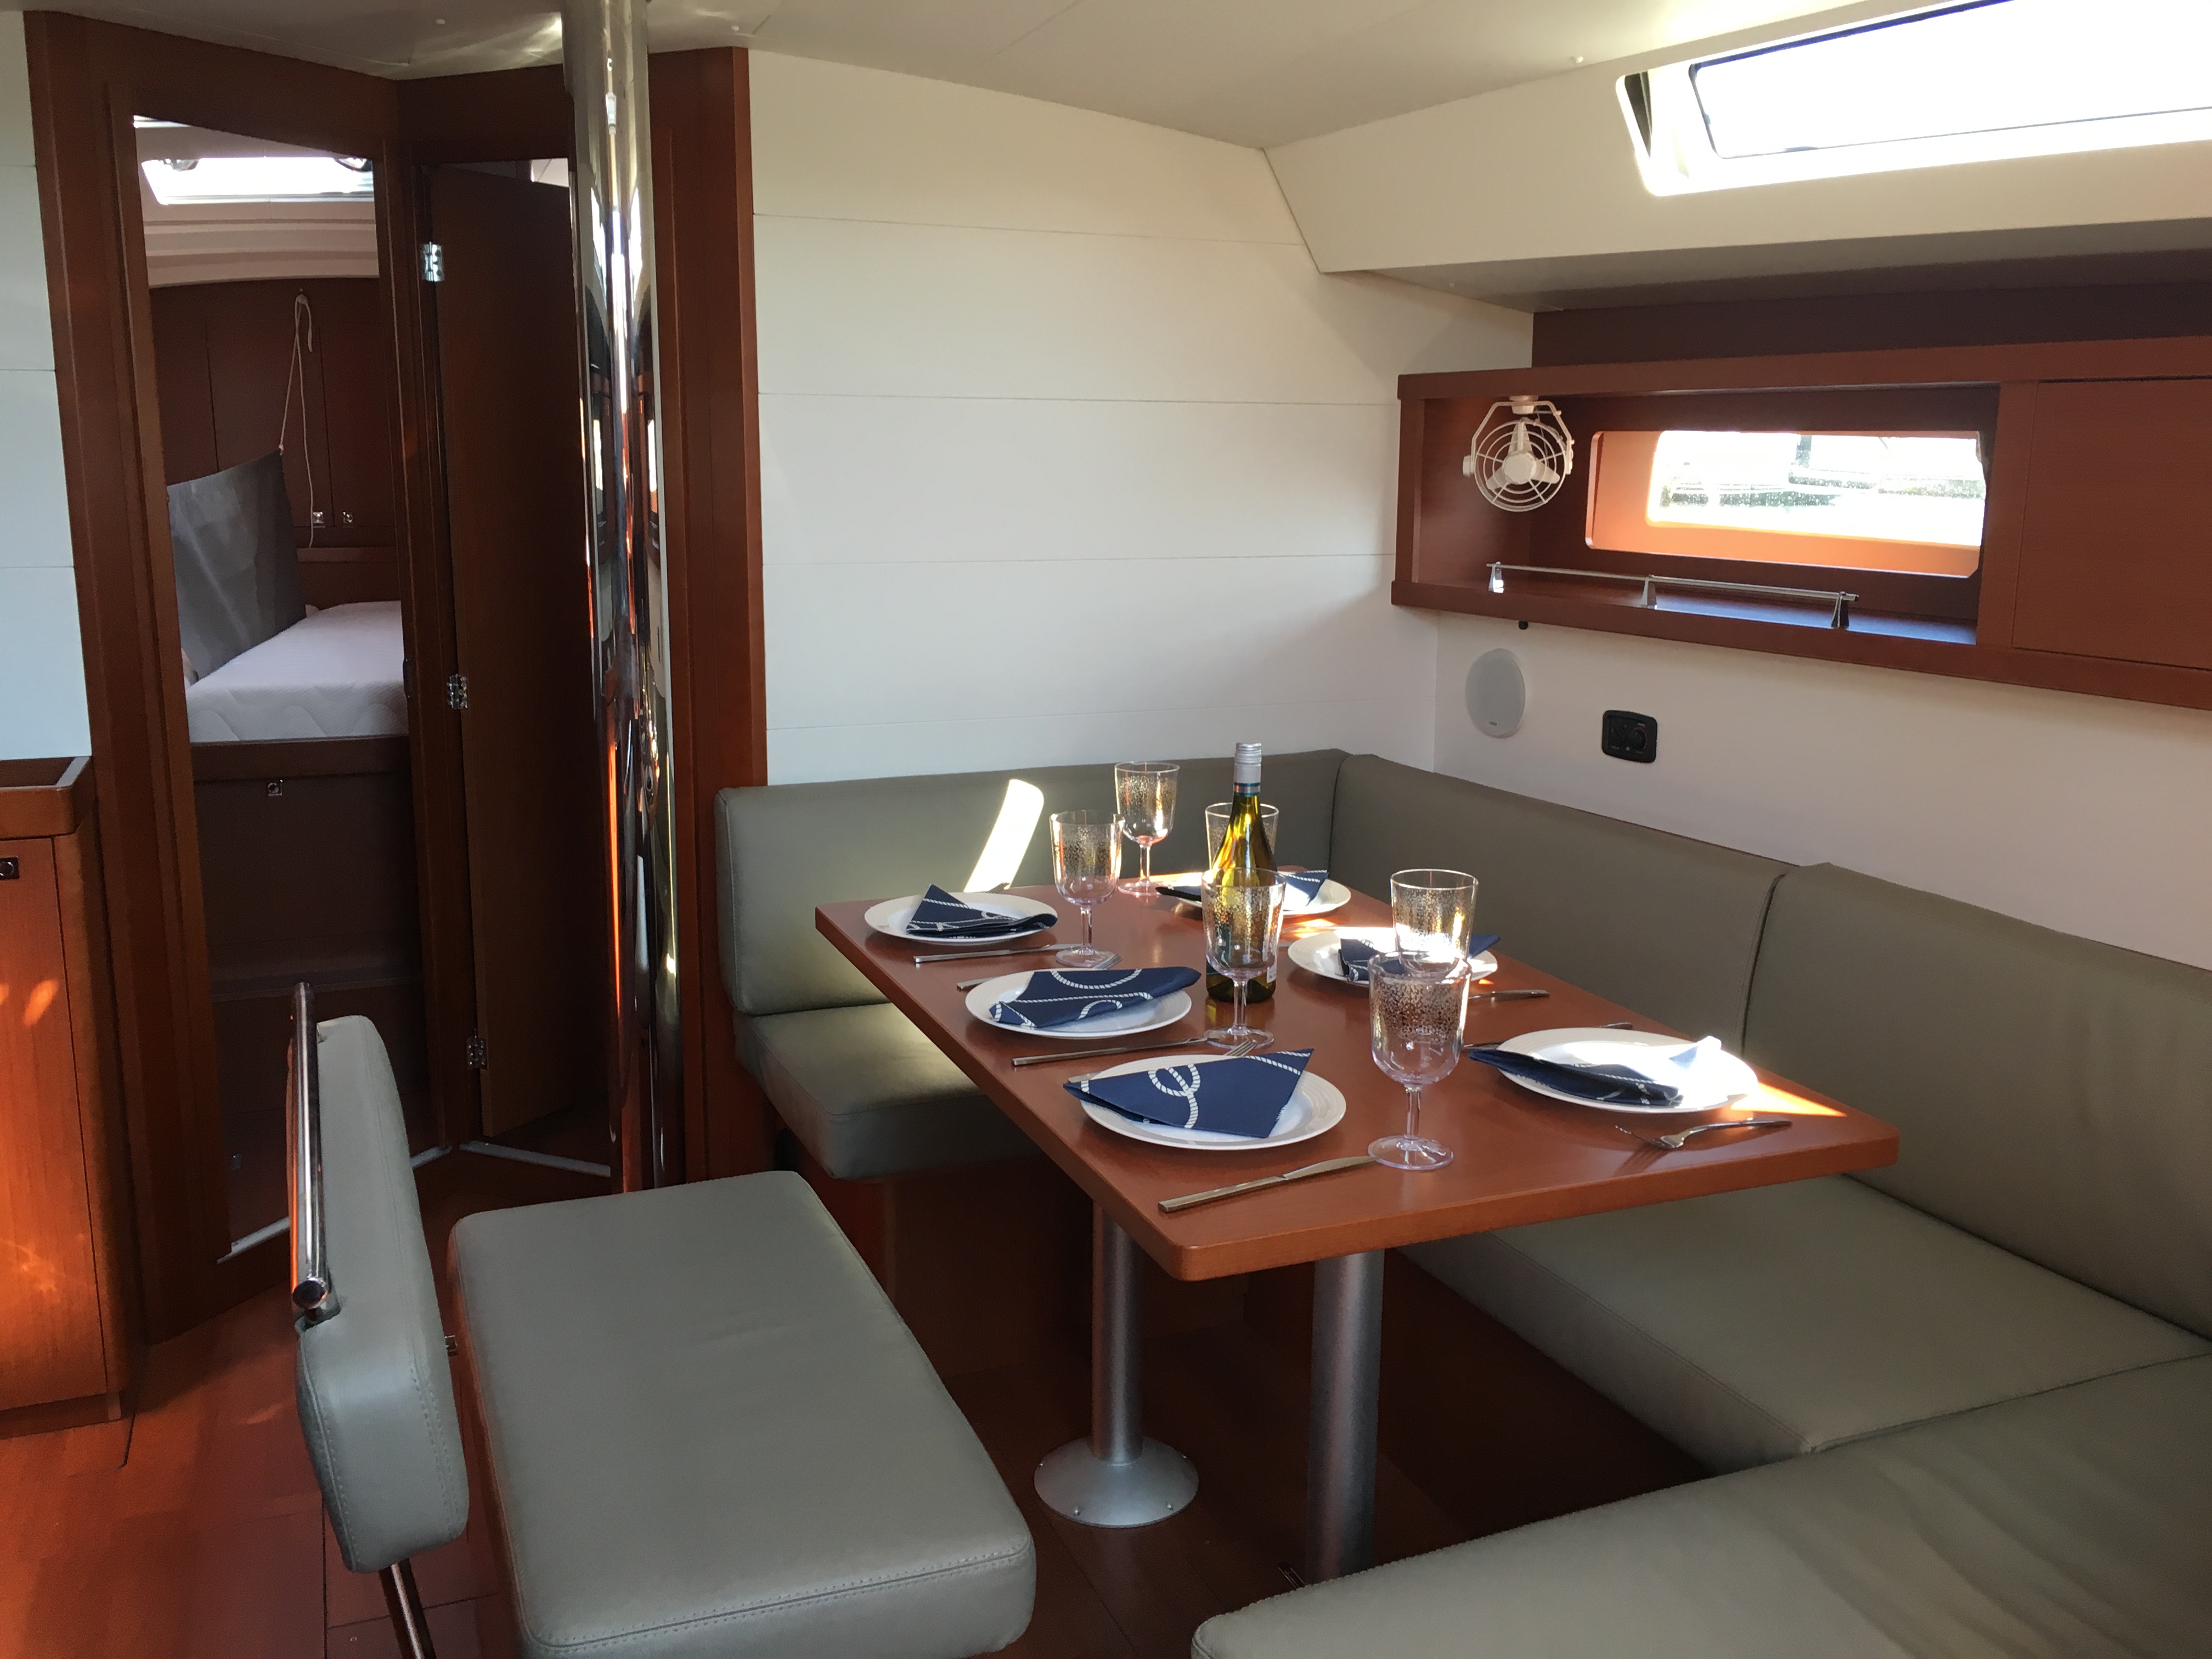 oceanis 45 - Yacht Charter Largs & Boat hire in United Kingdom Scotland Firth of Clyde Largs Largs Yacht Haven 3